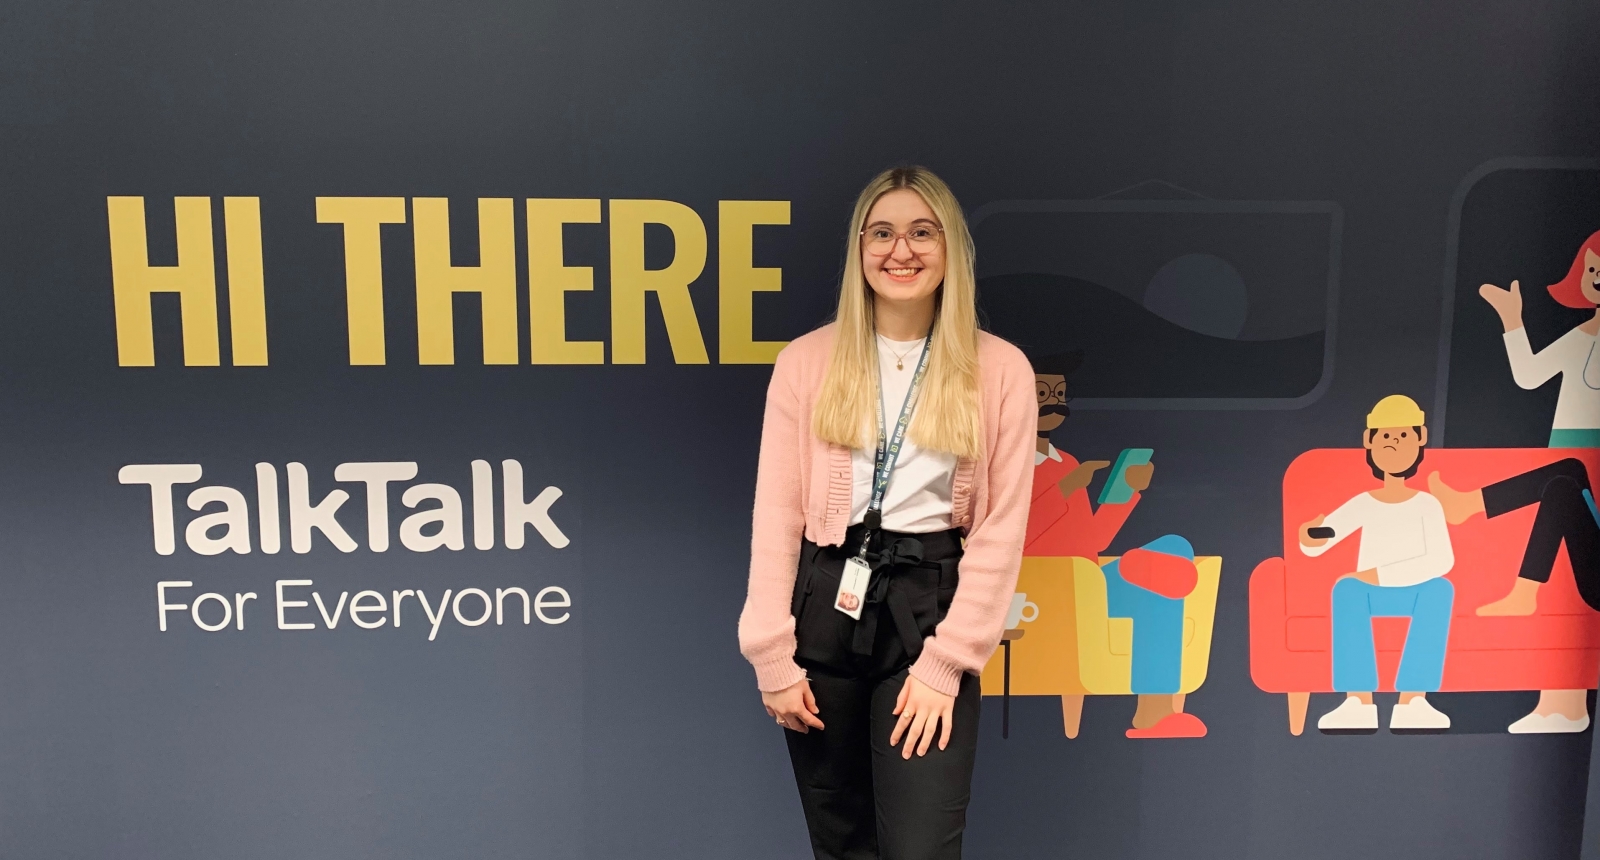 Maisie Lawrinson who is currently working as a Talent Sourcer at TalkTalk